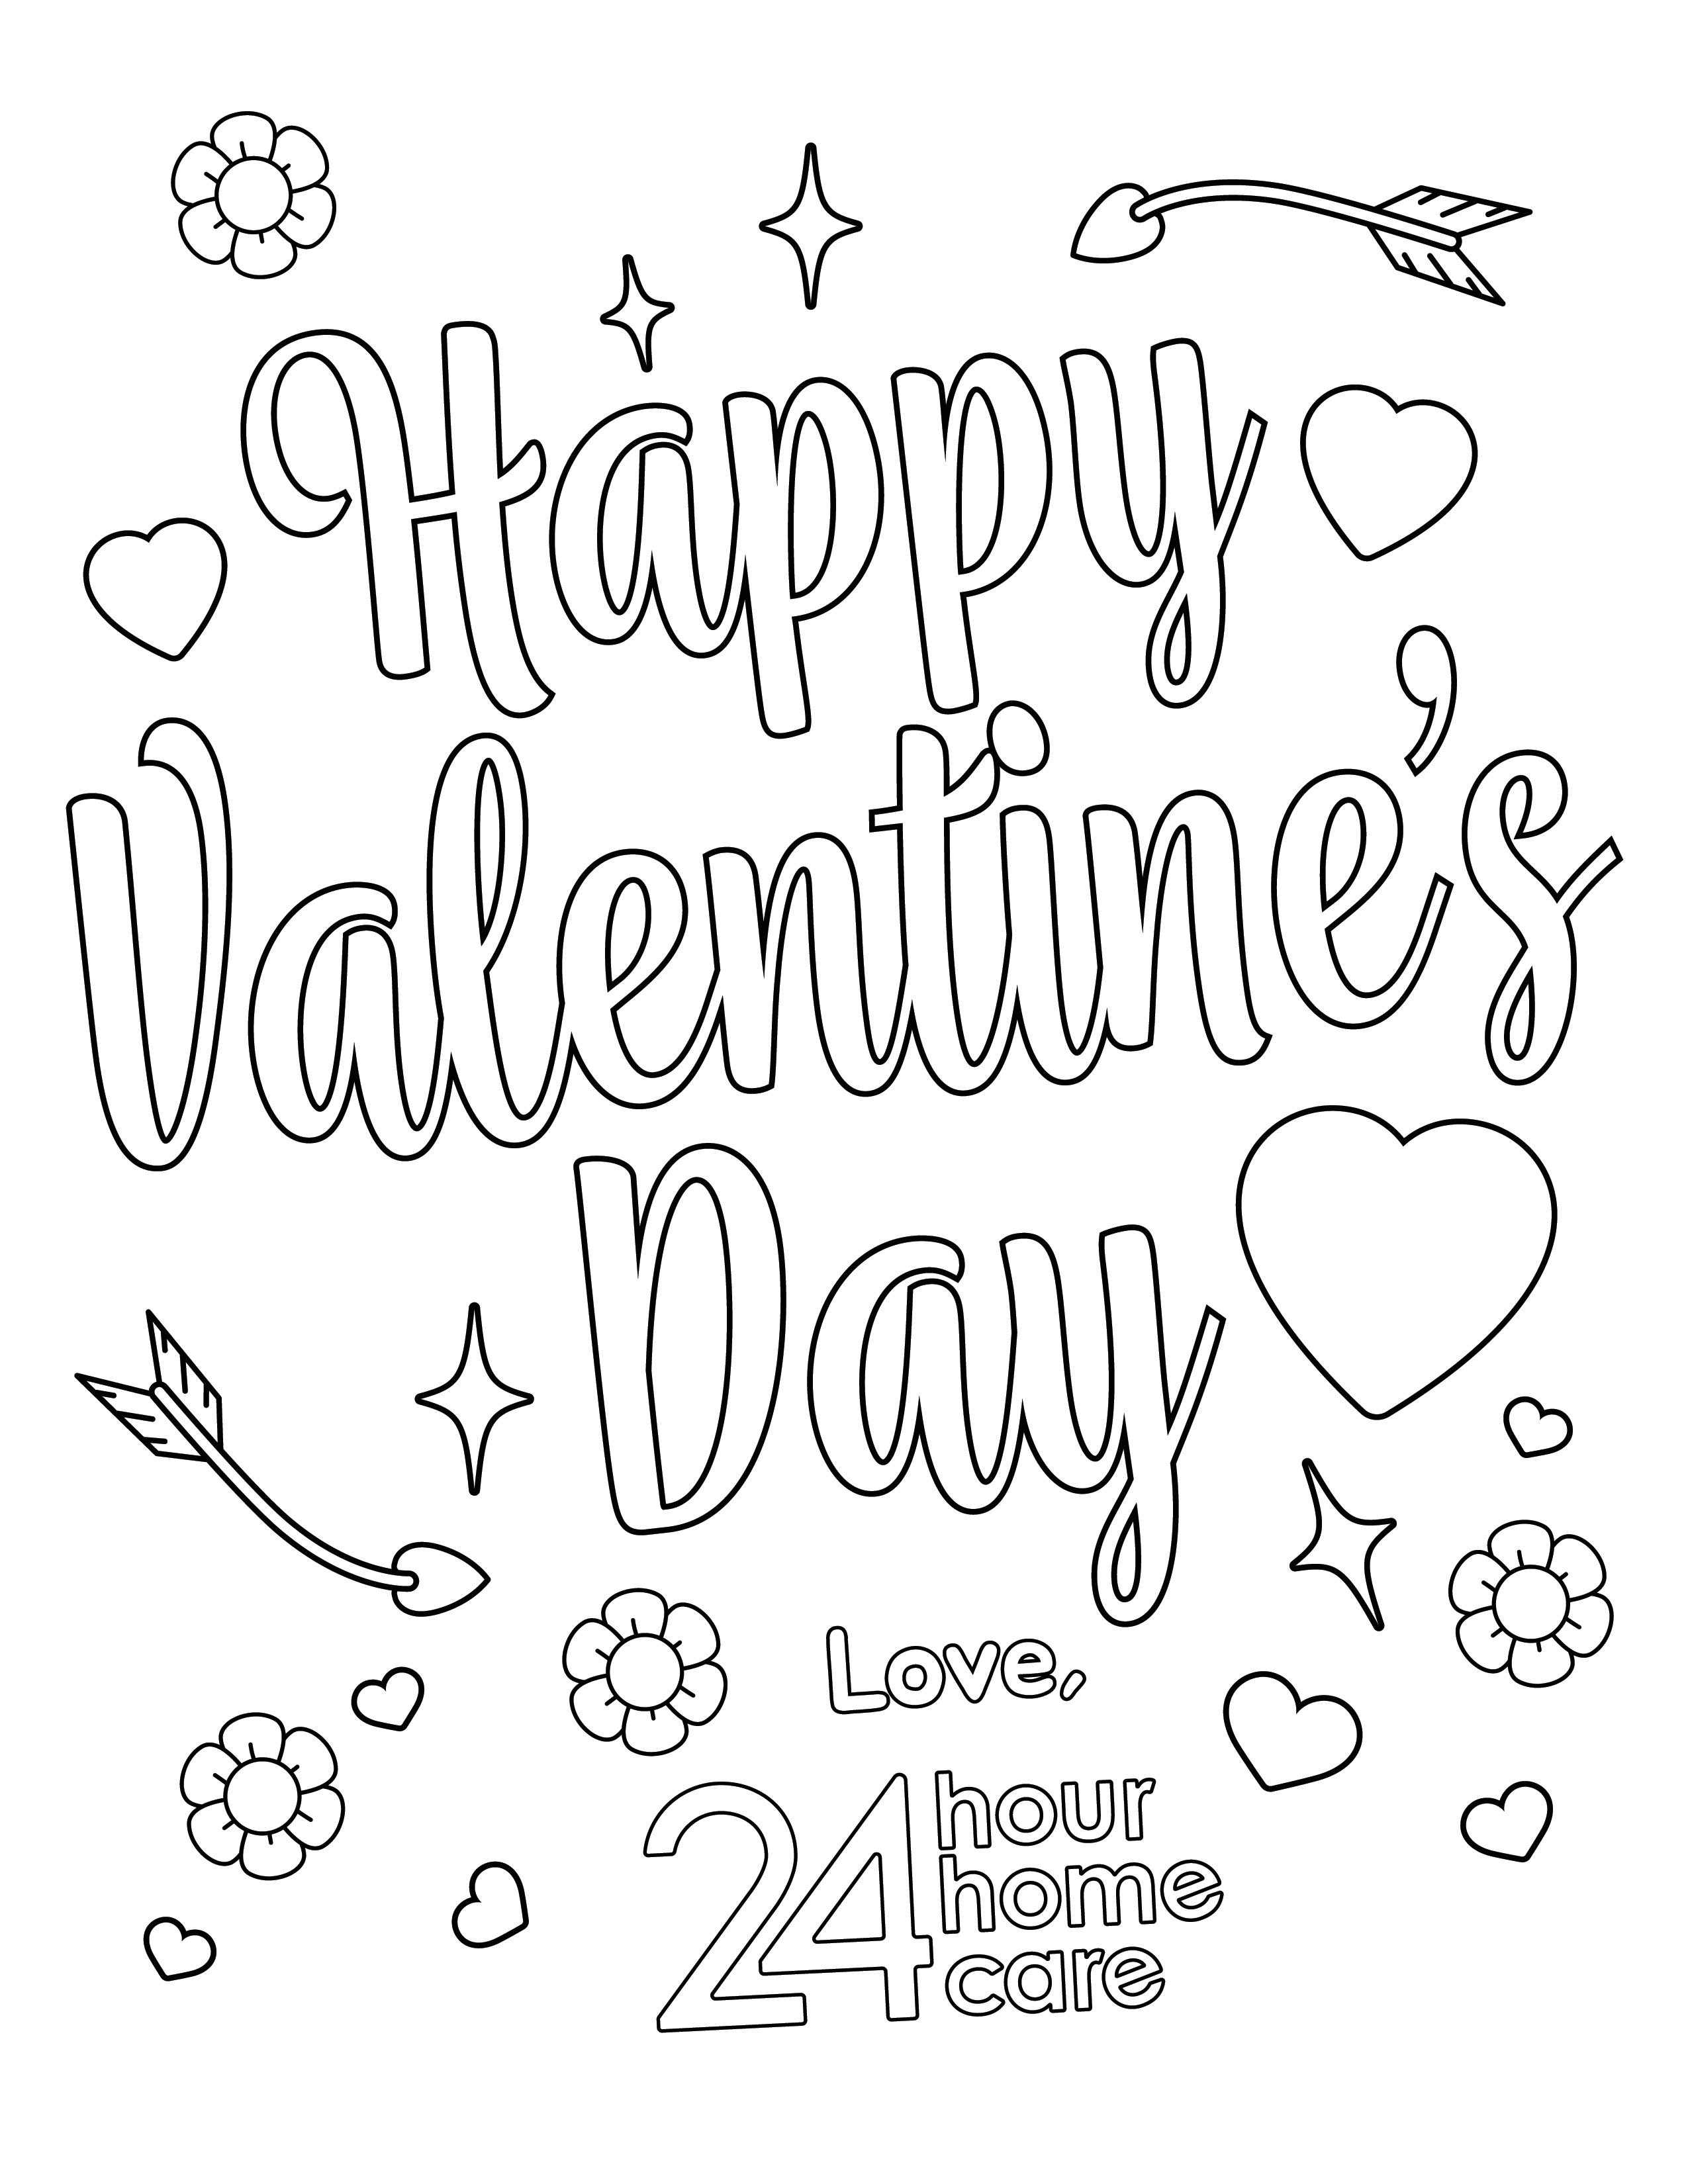 Happy Valentine's Day coloring sheet